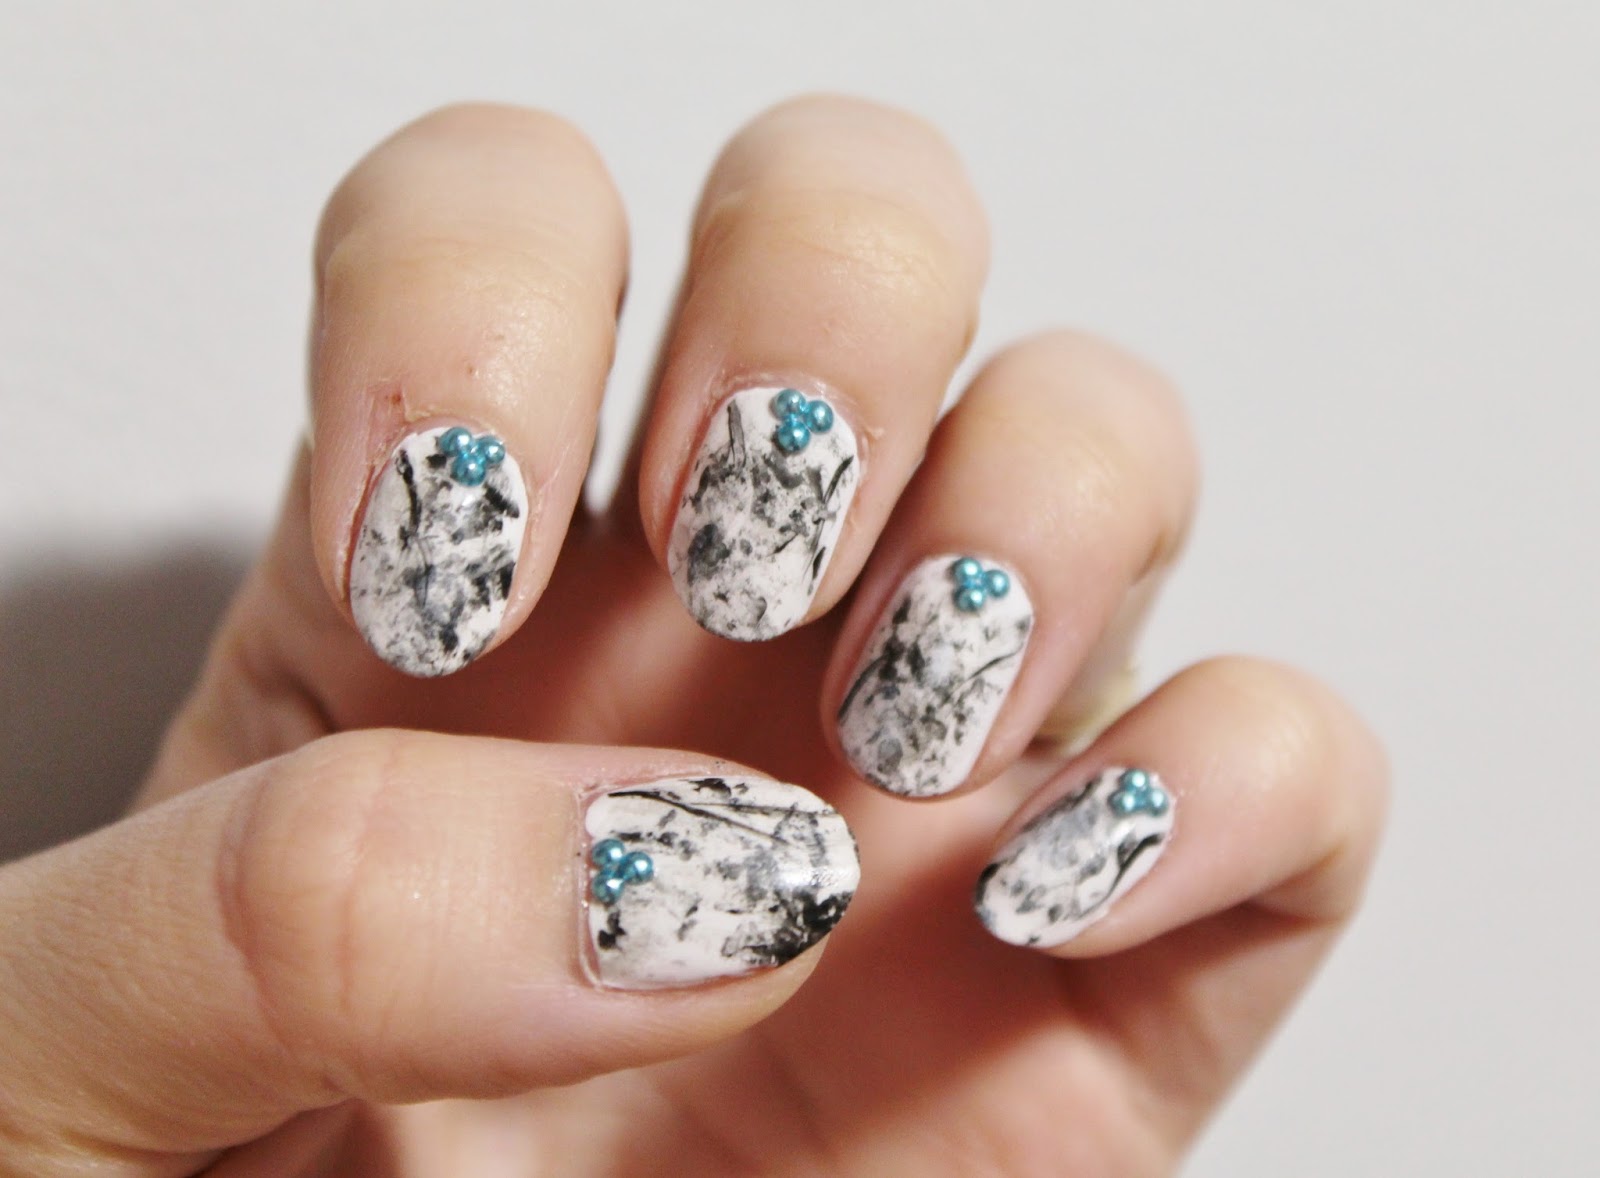 1. Marble Nail Art Tips and Tricks - wide 1